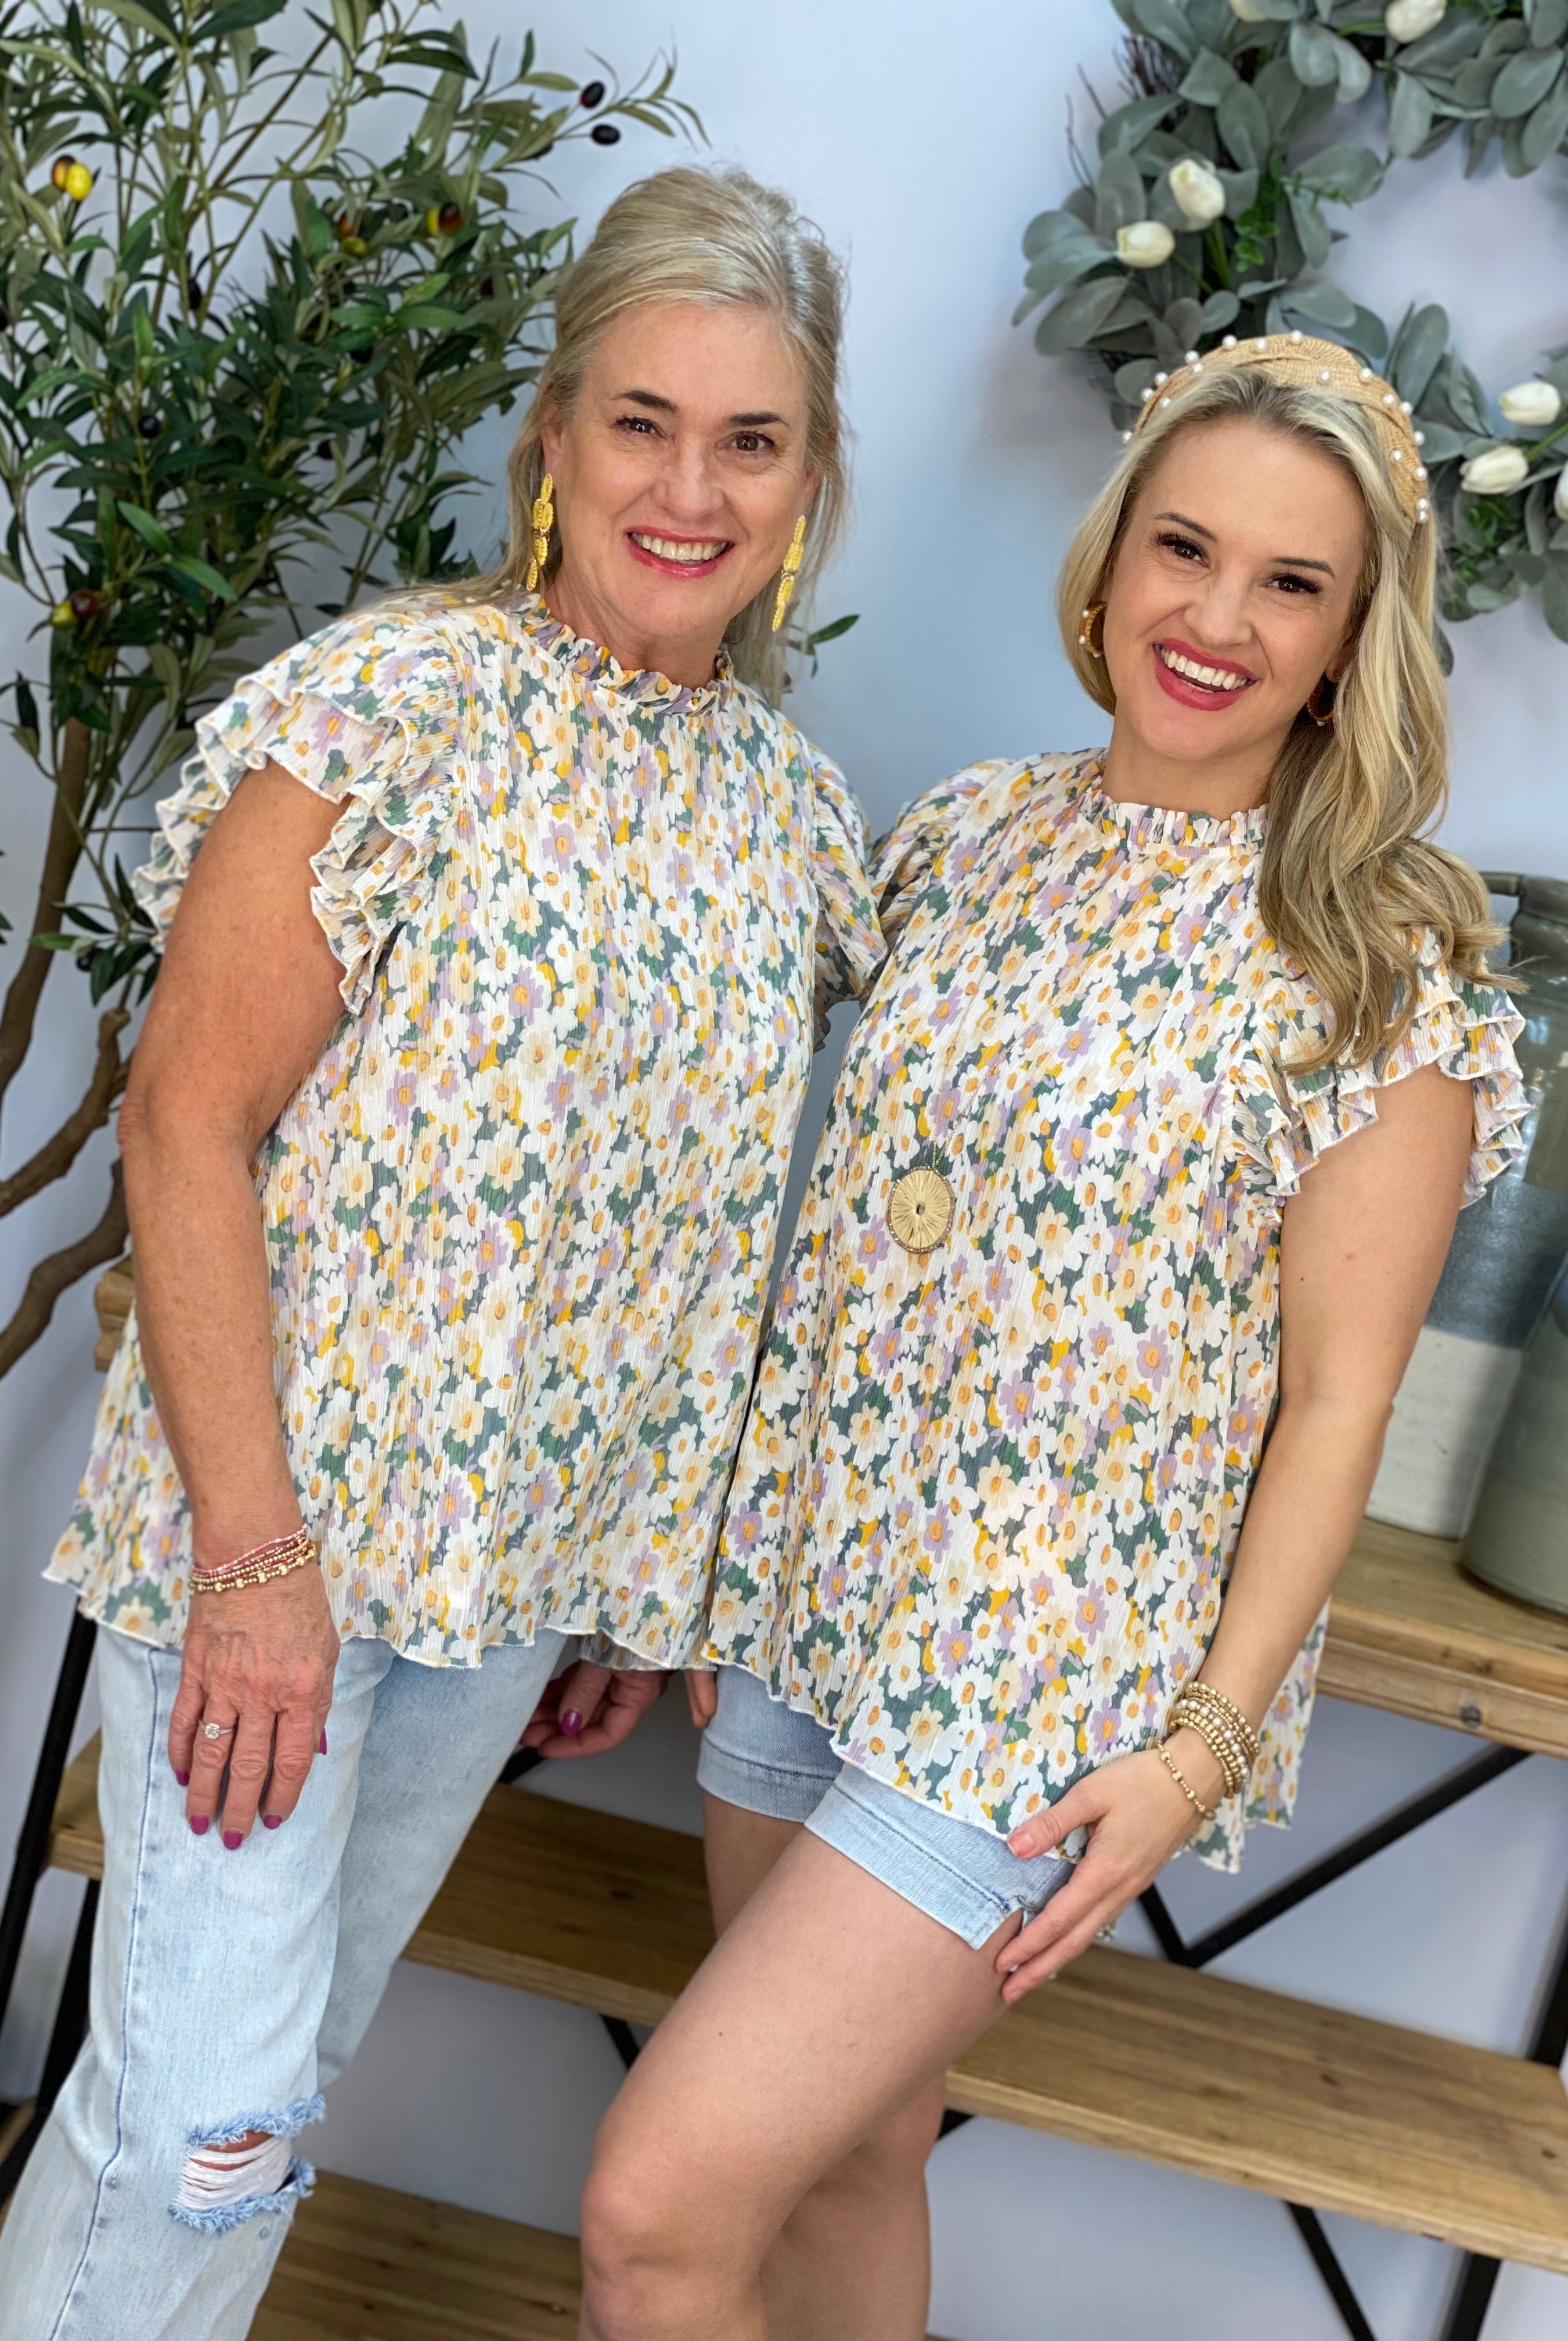 Brighten The Day Blouse-Tops-The Lovely Closet-The Lovely Closet, Women's Fashion Boutique in Alexandria, KY